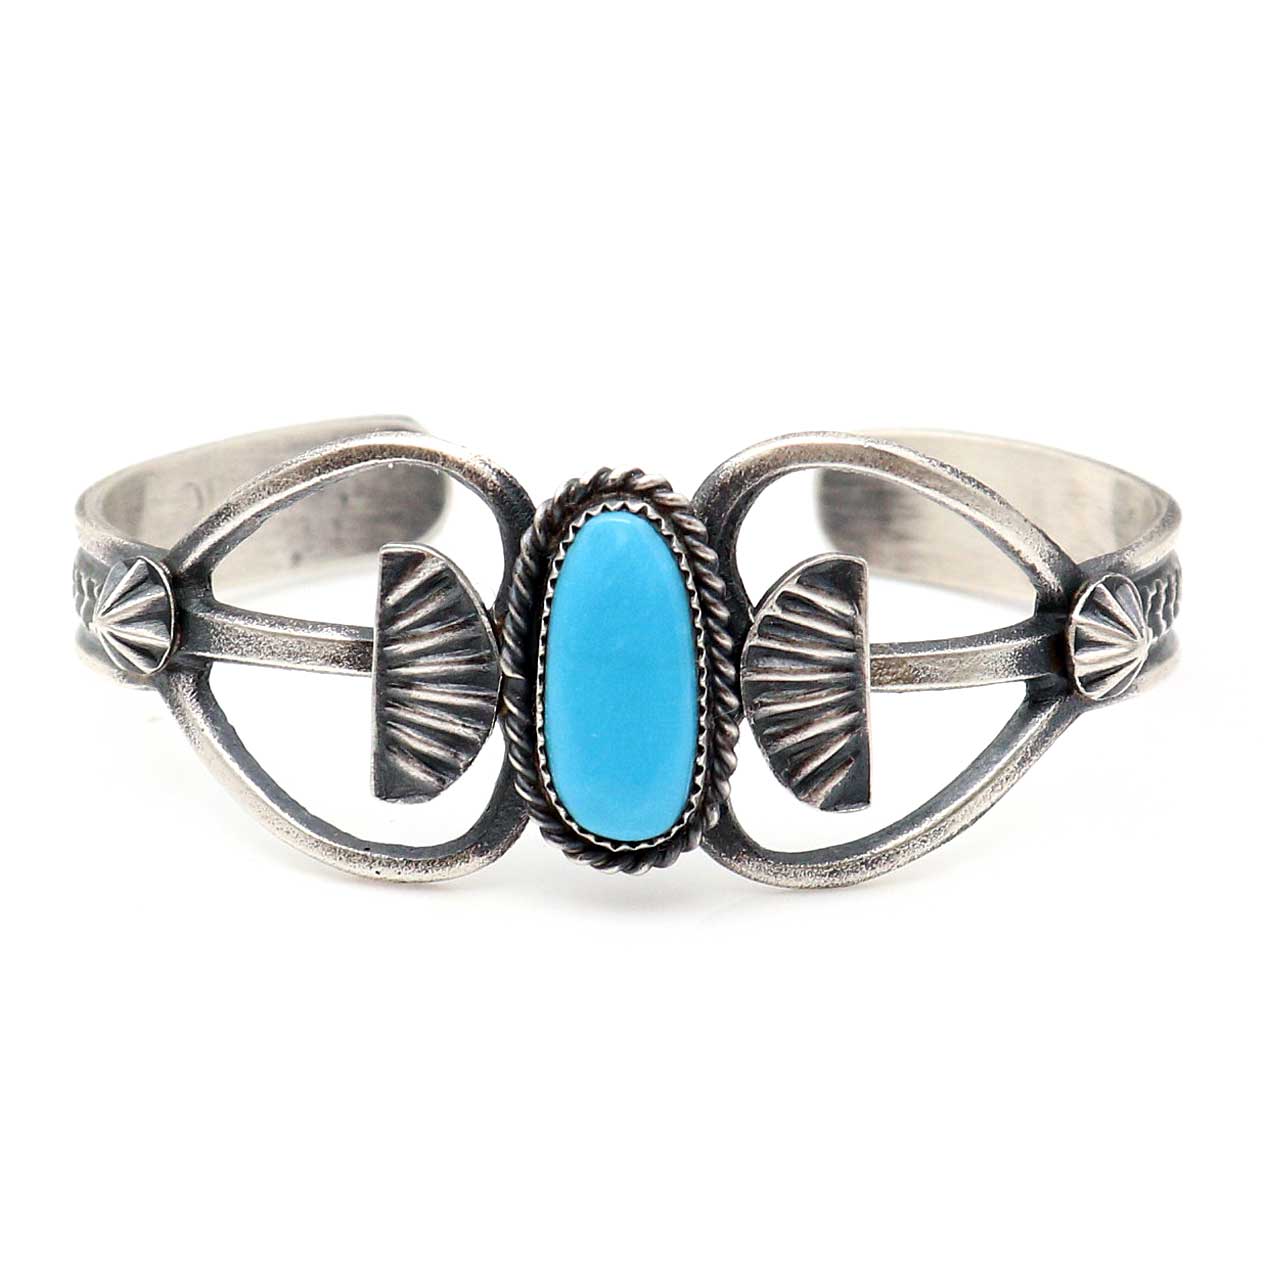 Sterling Silver Bracelet With Single Turquoise Setting by Billah